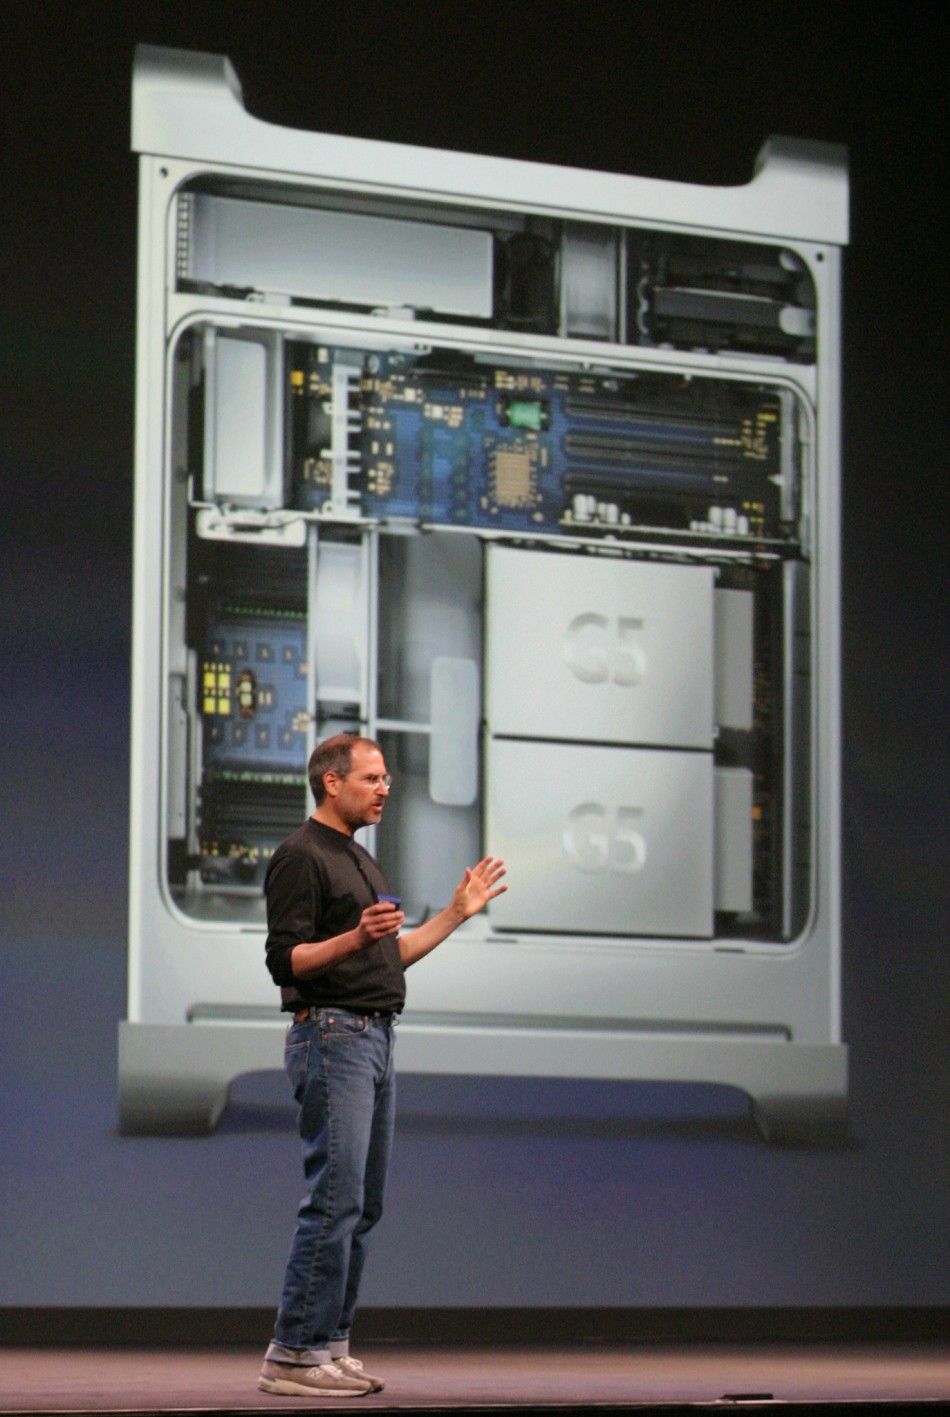 With the new Apple Power Mac G5 personal computer projected behind him, Apple CEO Steve Jobs introduces the new computer at the Apple World Wide Developers Conference in San Francisco